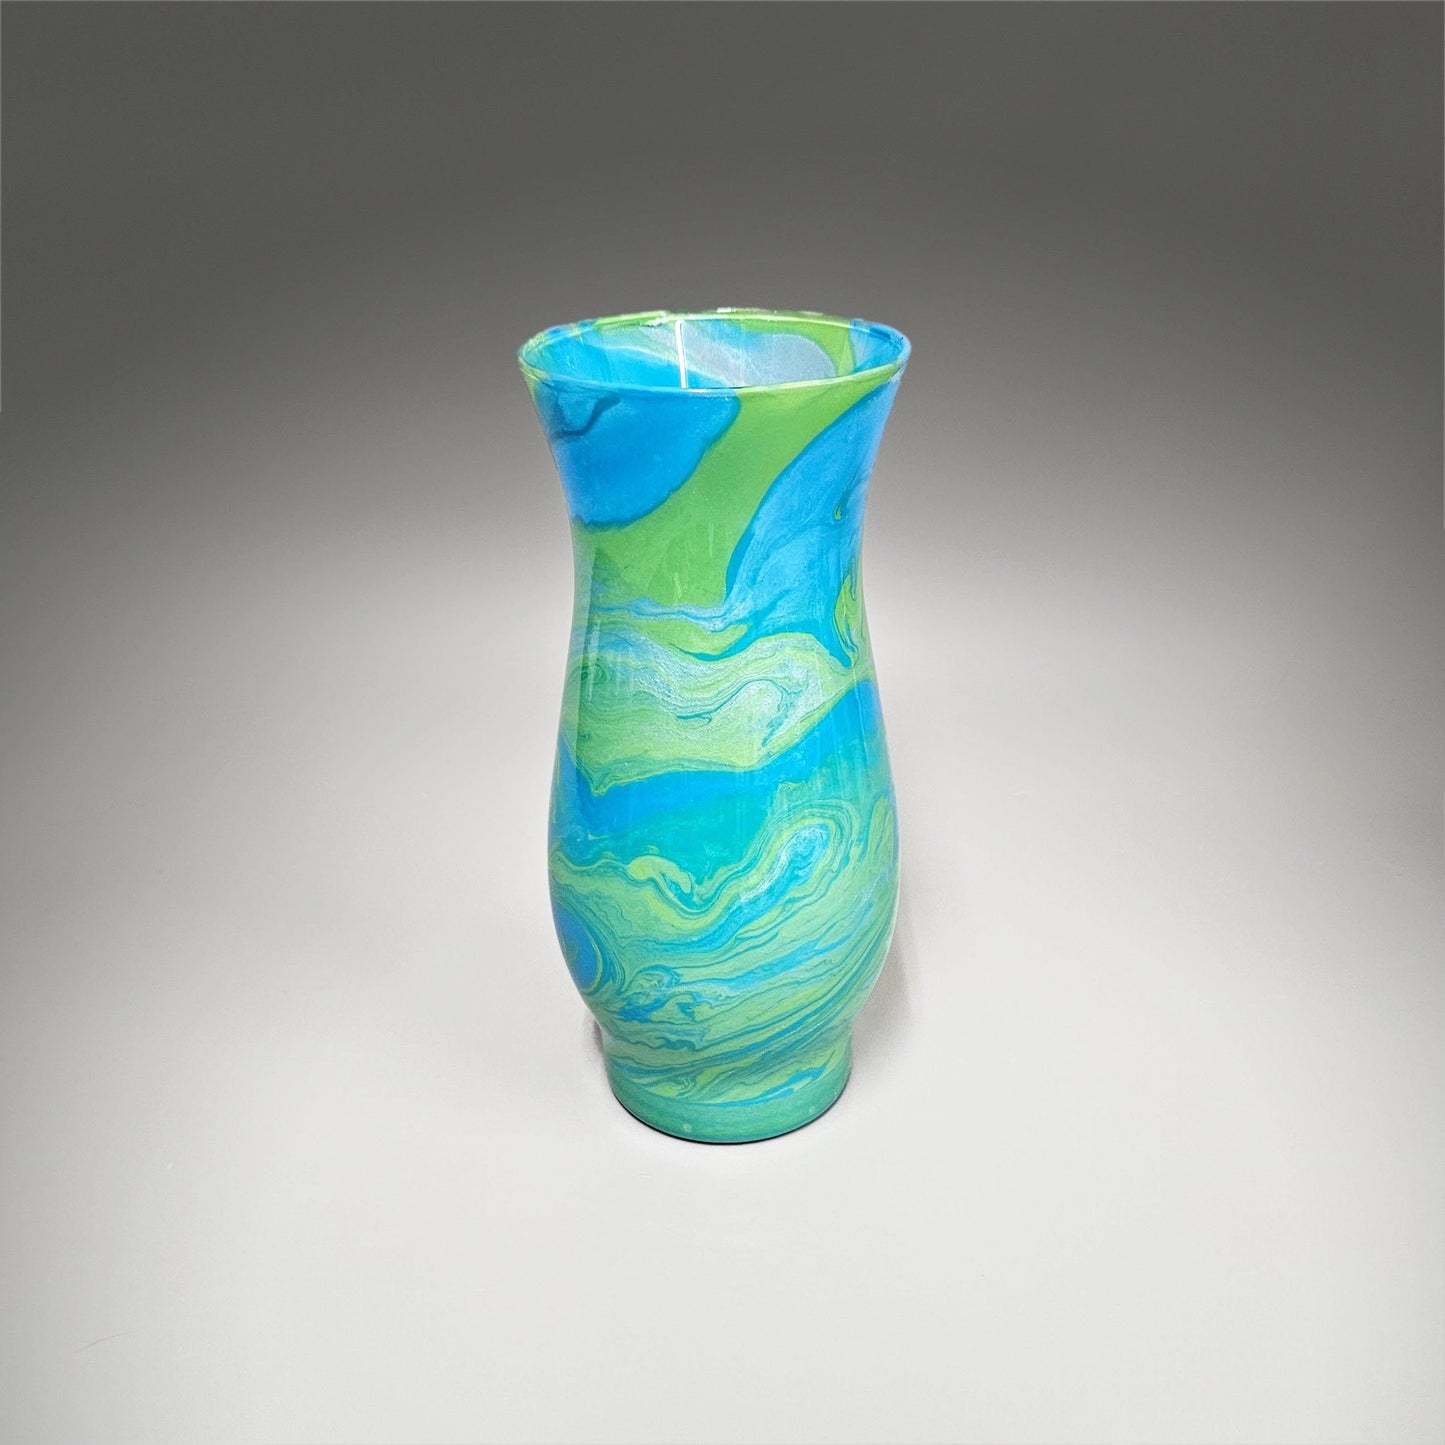 Flower Vase in Sky Blue and Bright Green | Special Occasion Gift Ideas